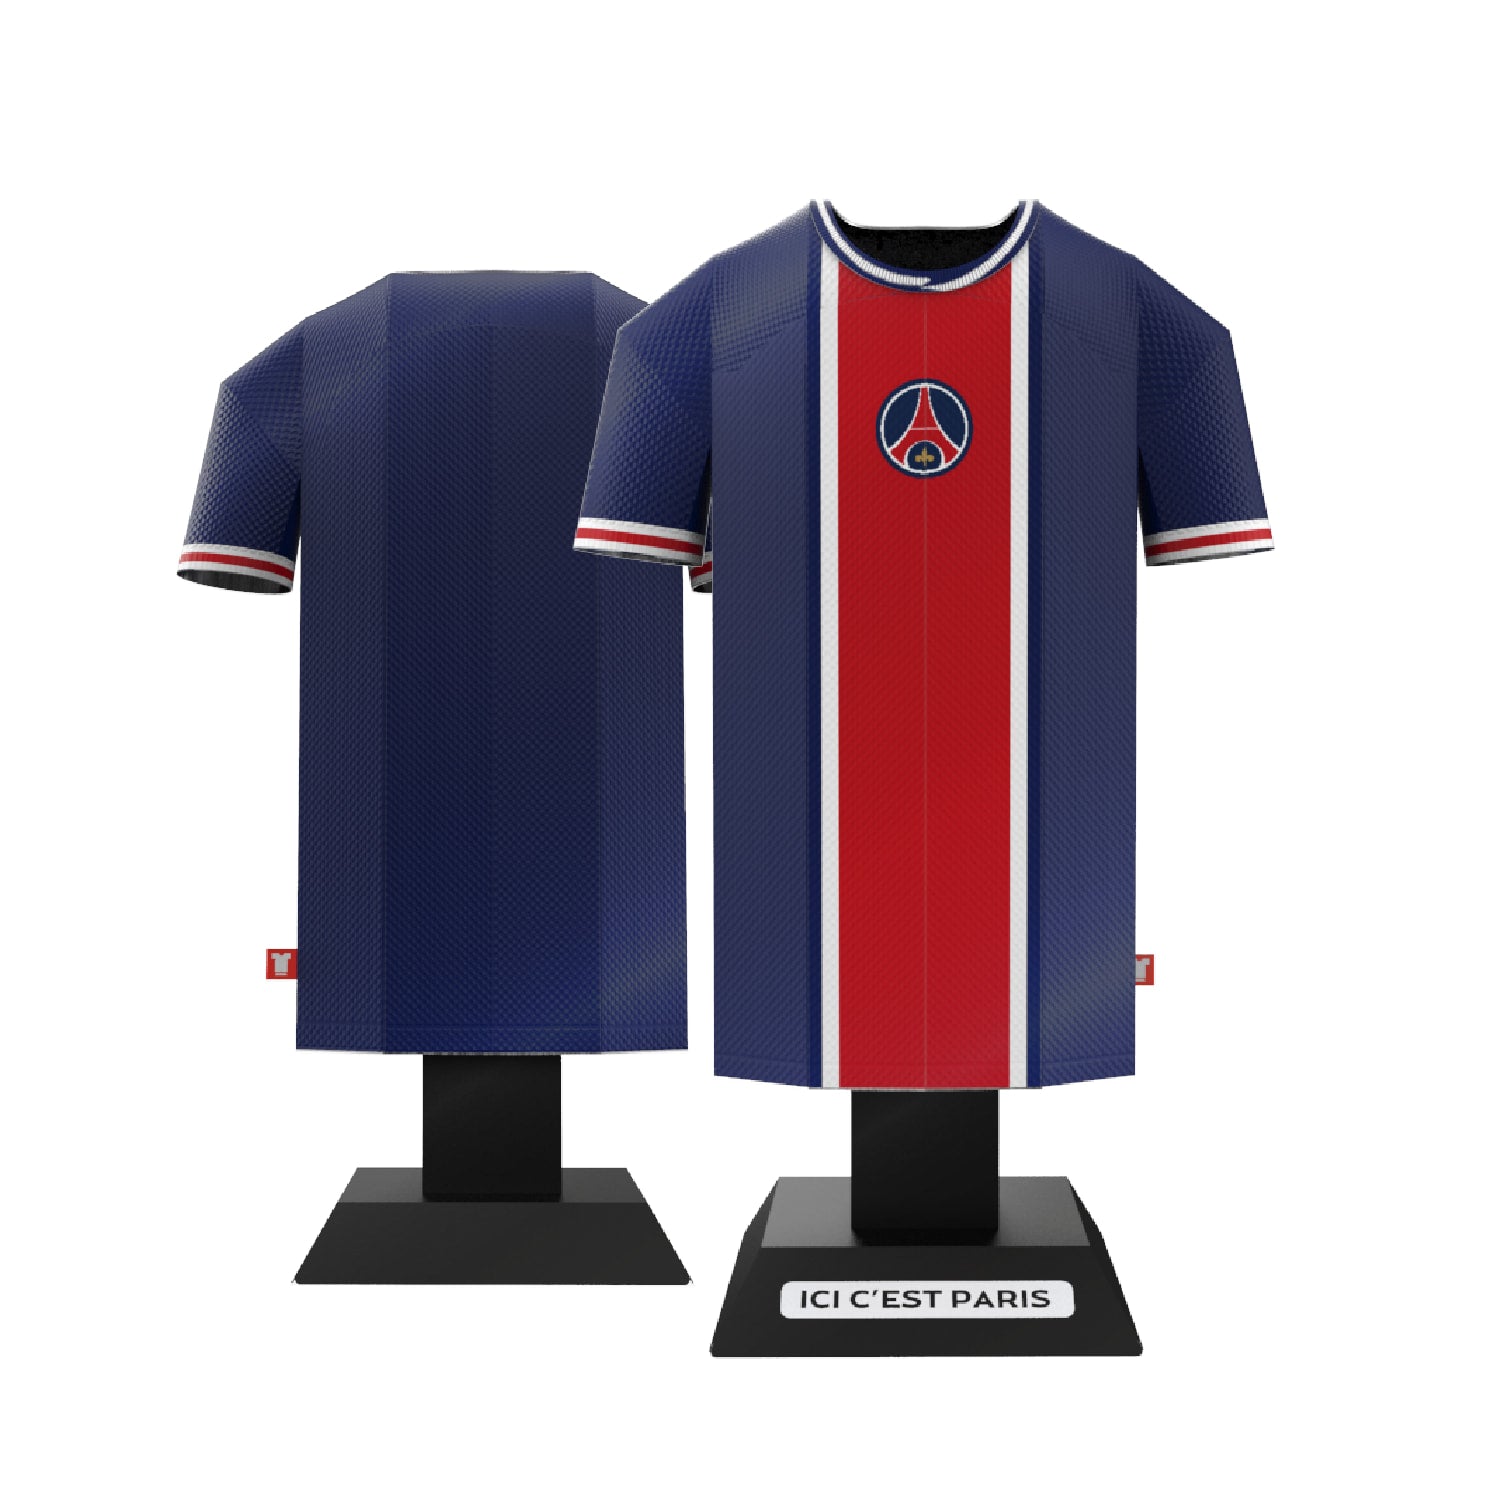 PSG Retro Jersey front and back view